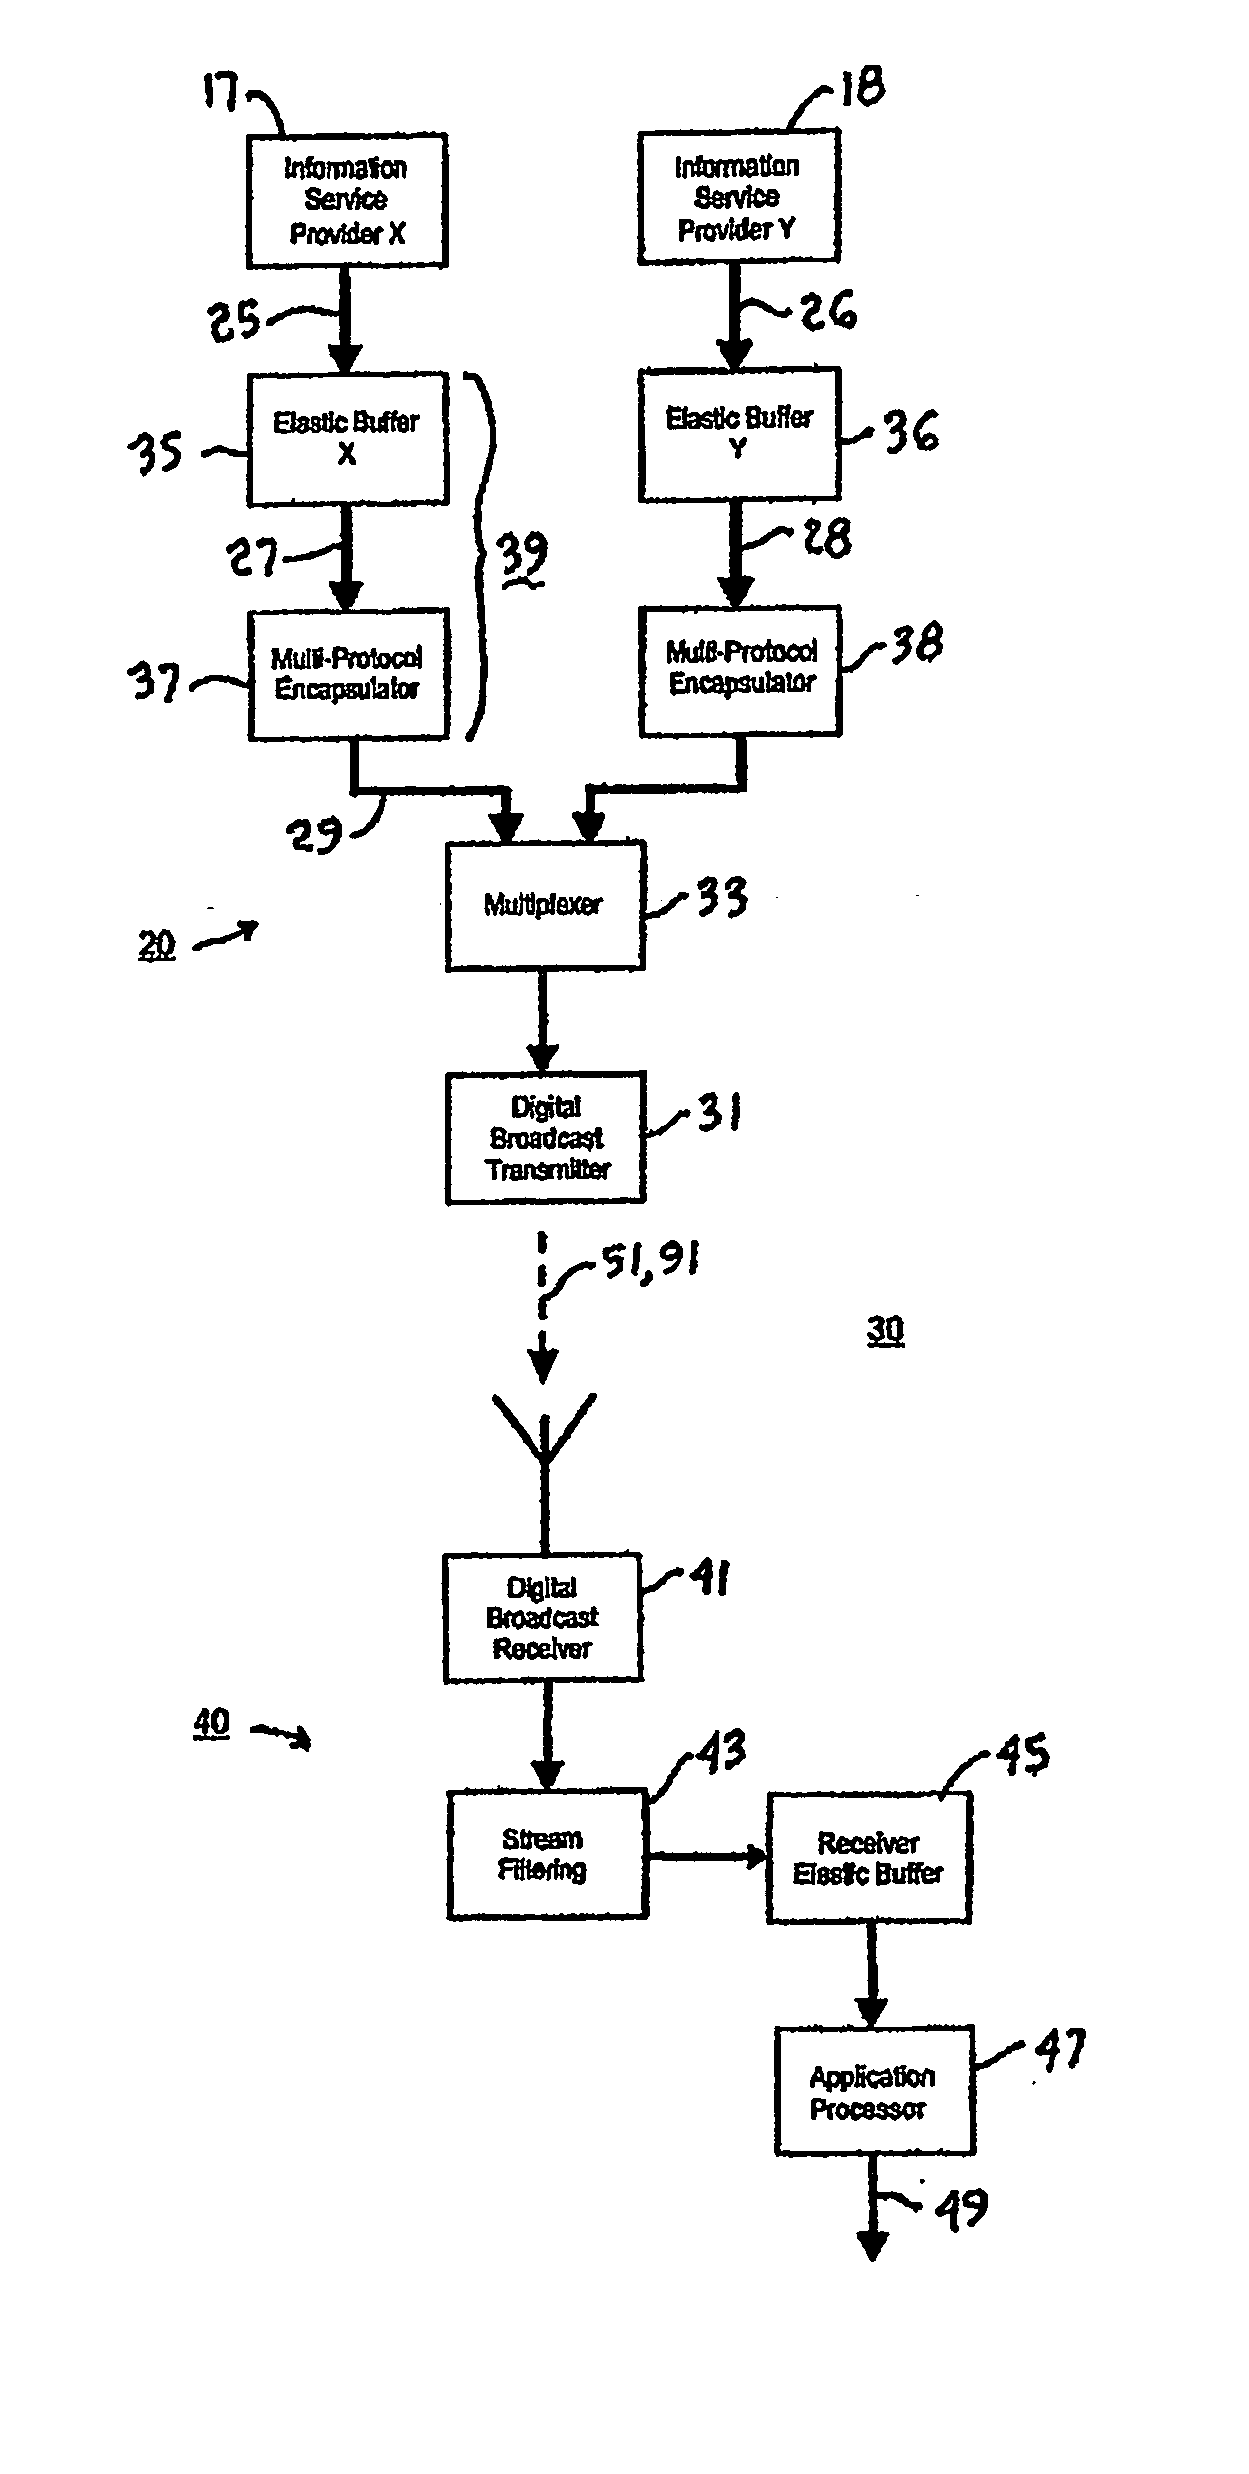 Data delivery over a cellular radio network